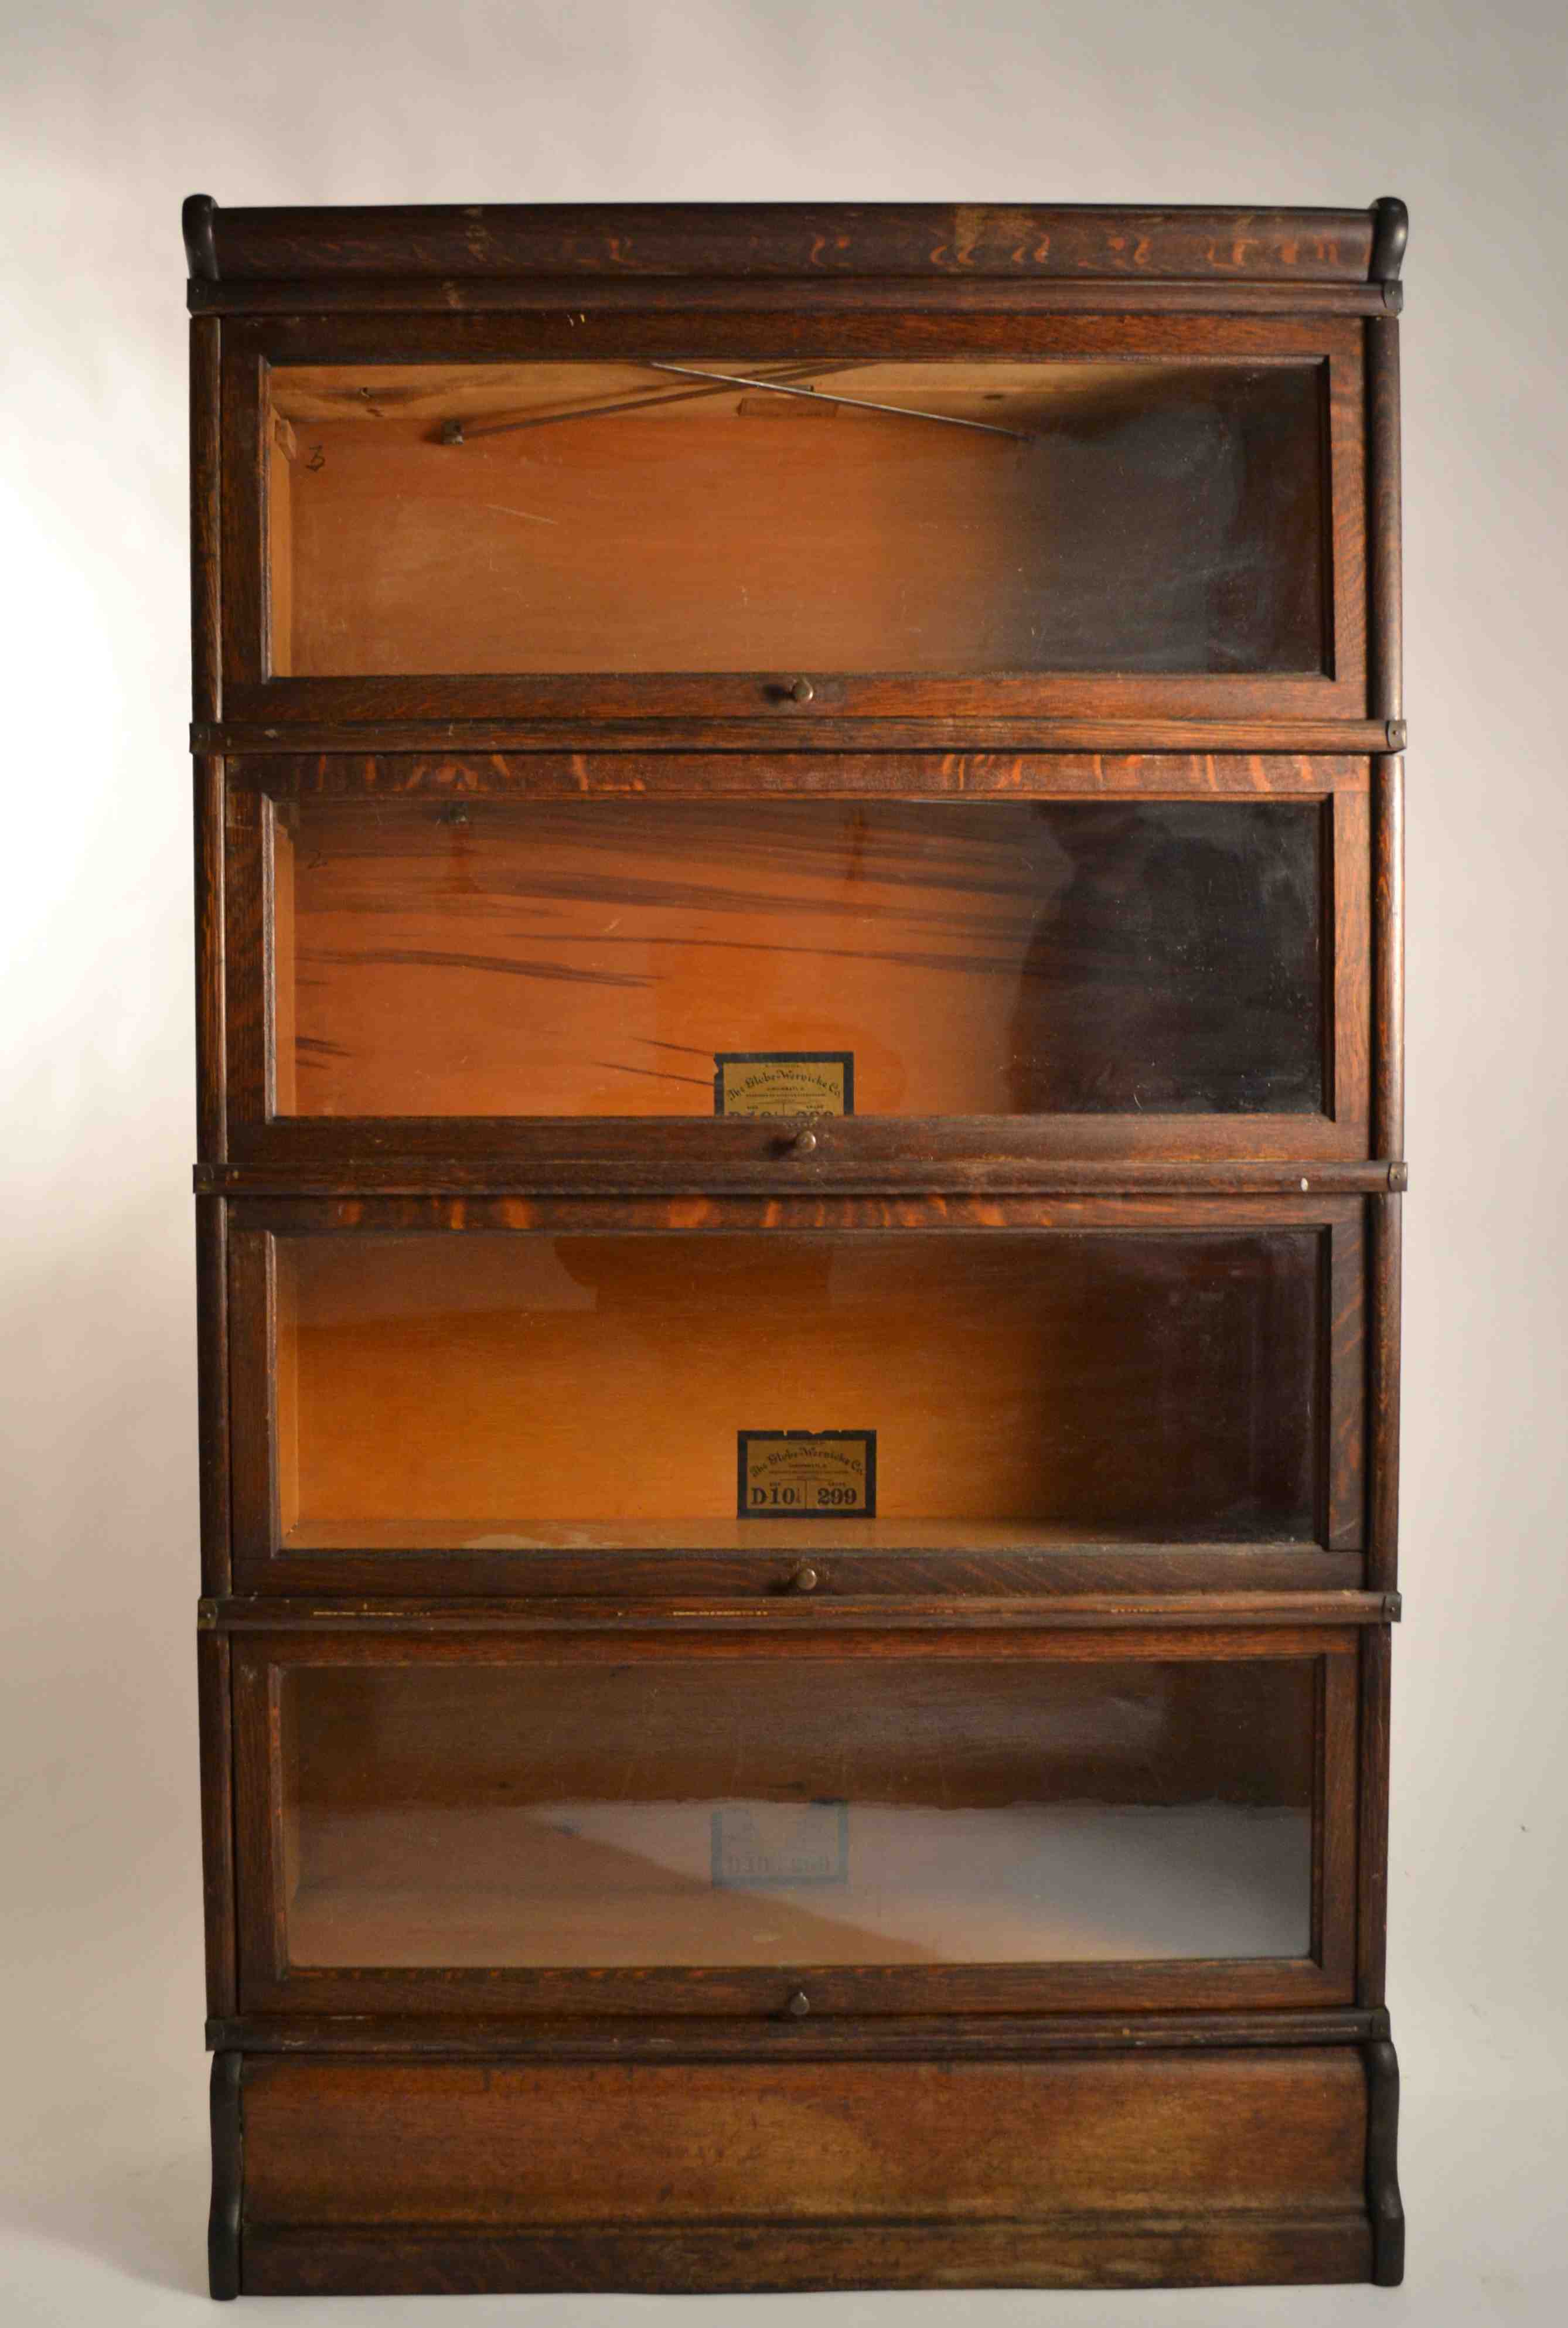 A Turn of the Century Oak Stacking Bookcase By Globe Wernicke